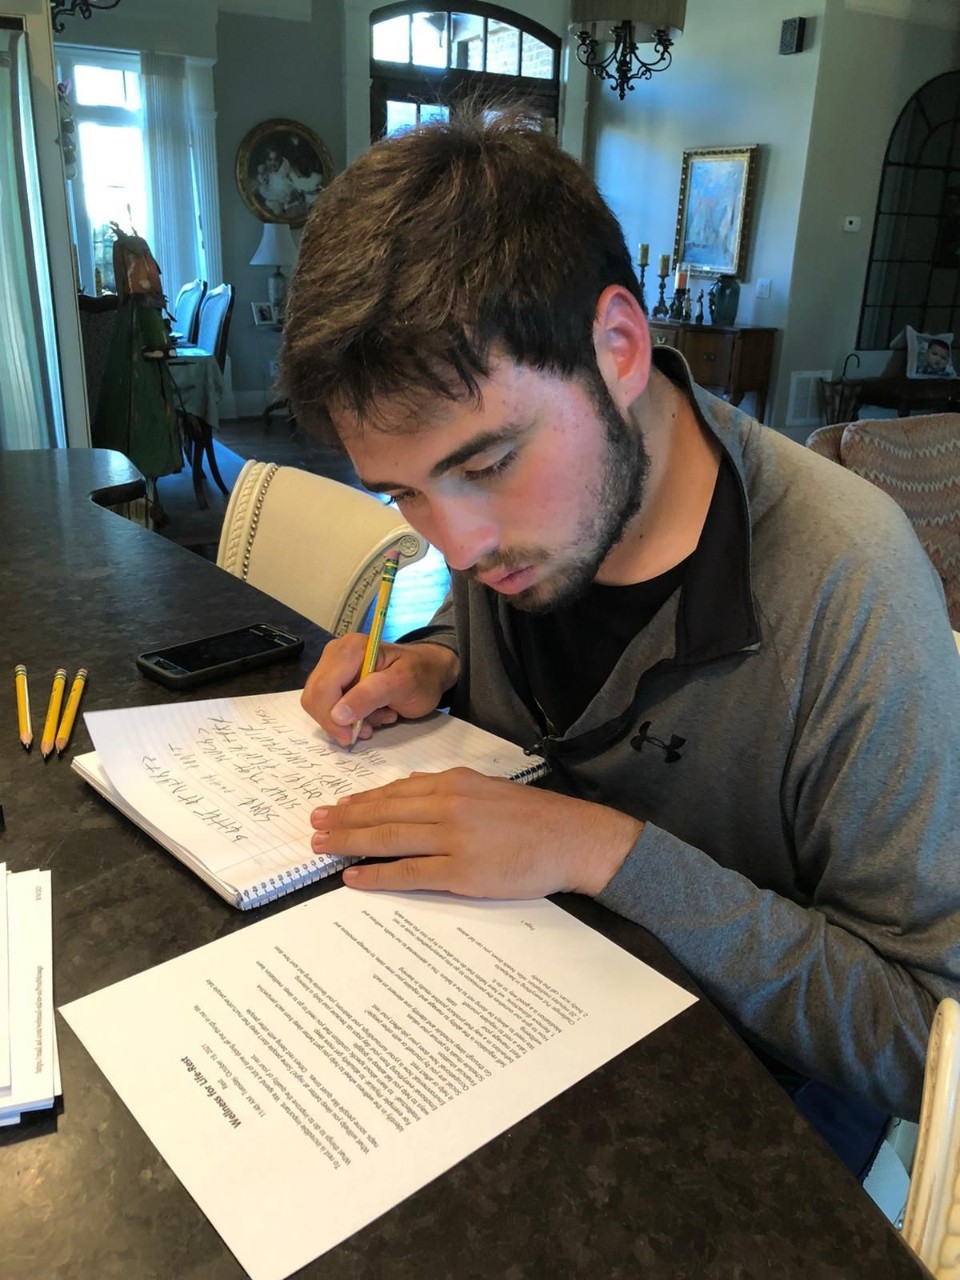 A man sitting at a counter working on homework